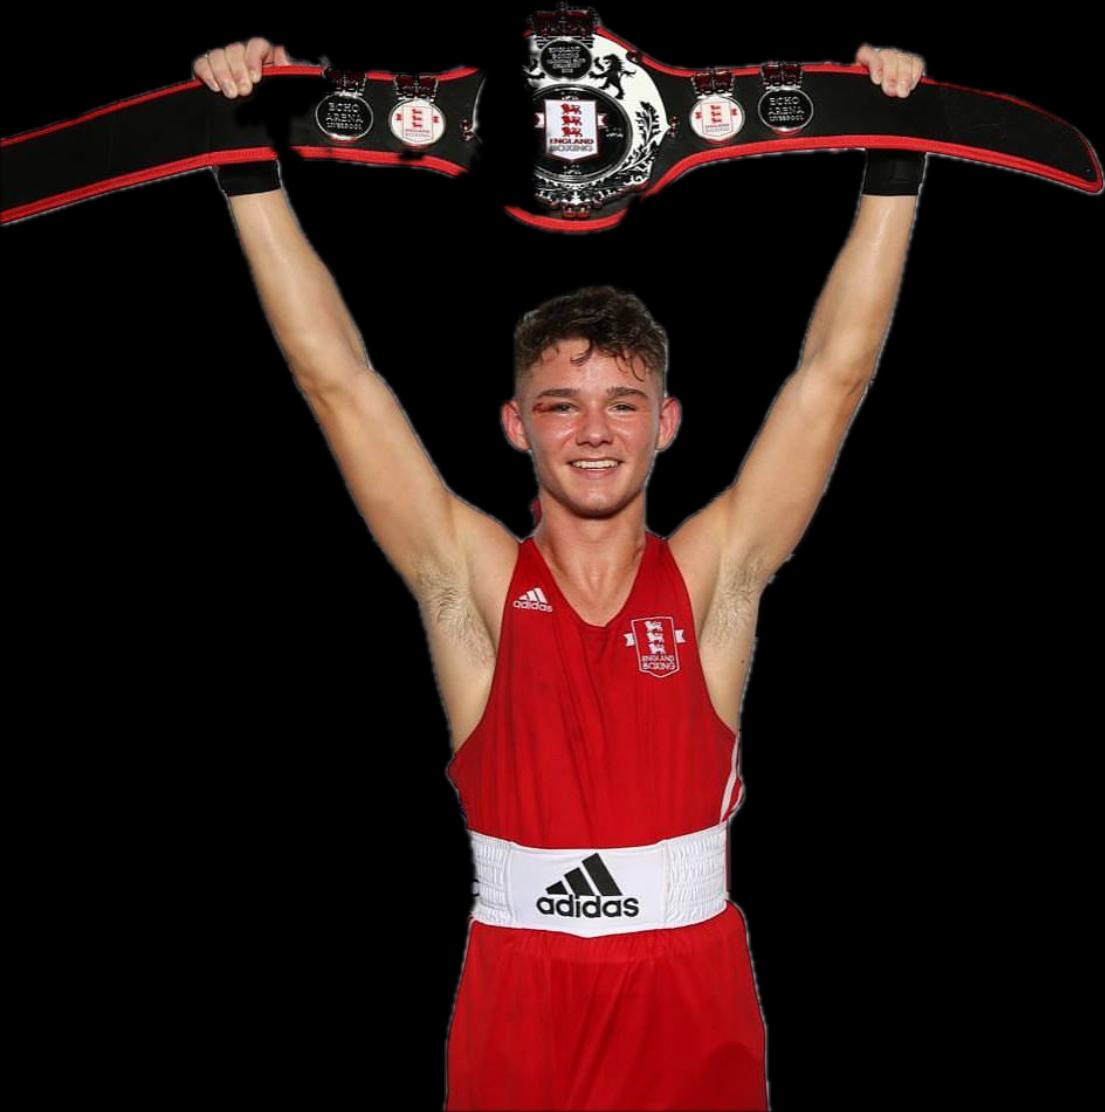 Eight years ago today a 18 year old  Will Cawley in his first senior bout, enters the NACs /ABAs gets cut in his first fight and yet goes on to  win them!  #oldhamboxing#englandboxing#willcawley